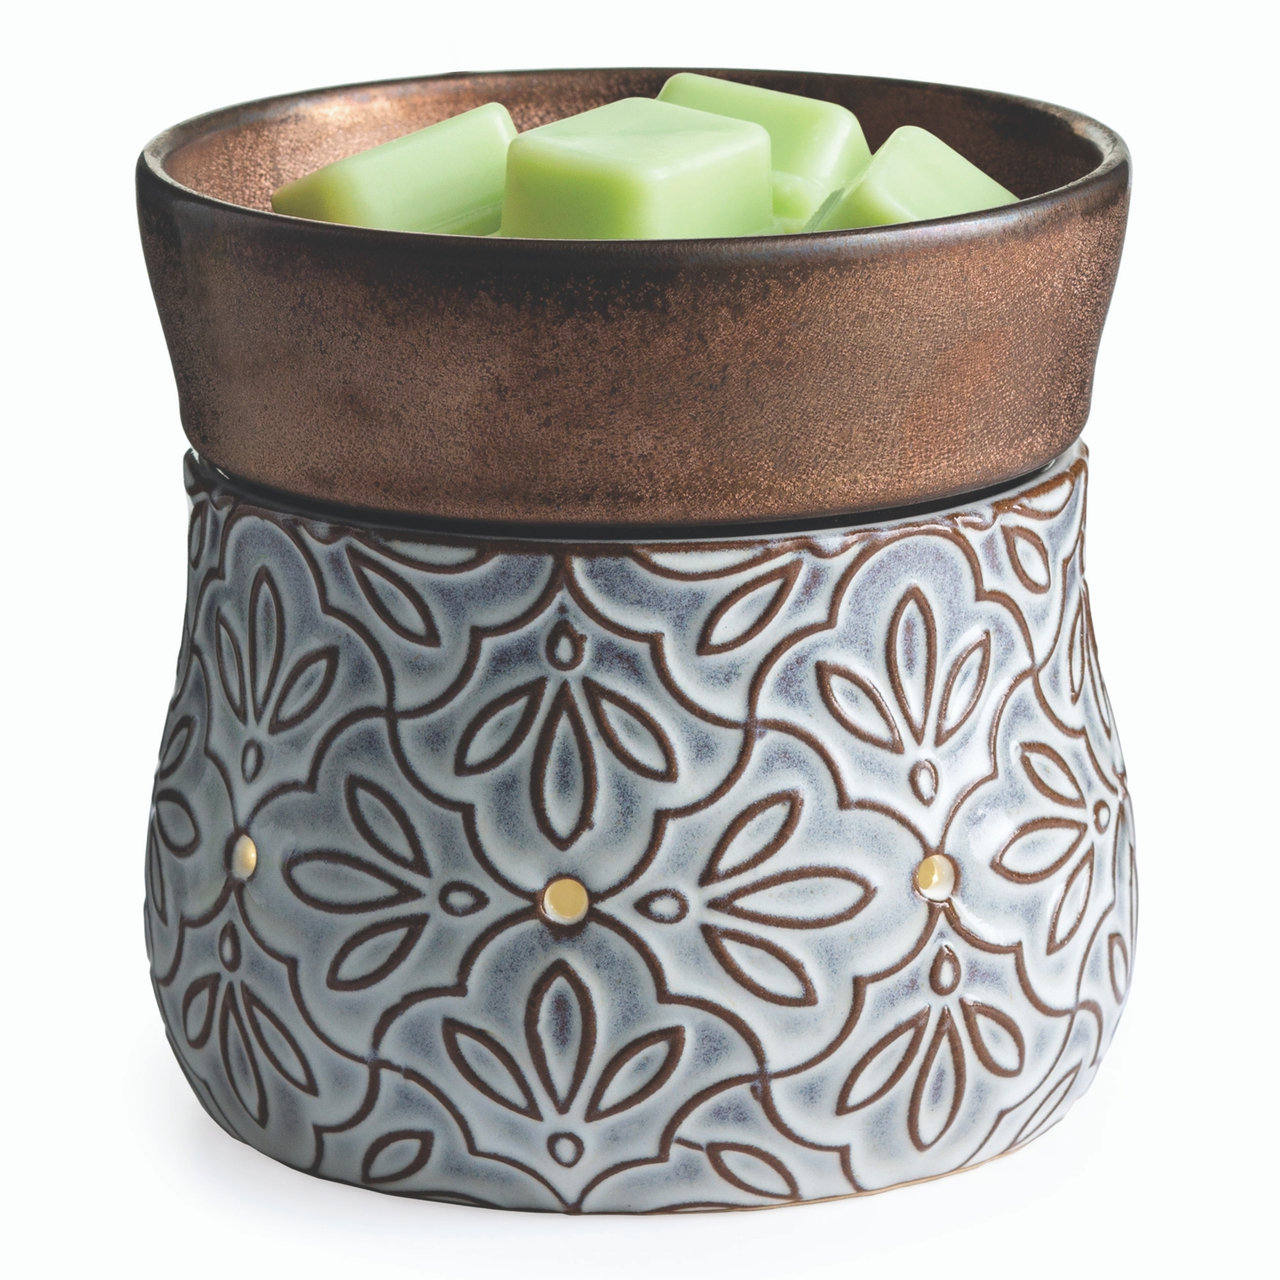 Fleur De Lis Ceramic Candle Warmer Electric with Safety Timer | Automatic  Plug in Fragrance Warmer for Scented Wax Melts, Cubes, Tarts | Air  Freshener